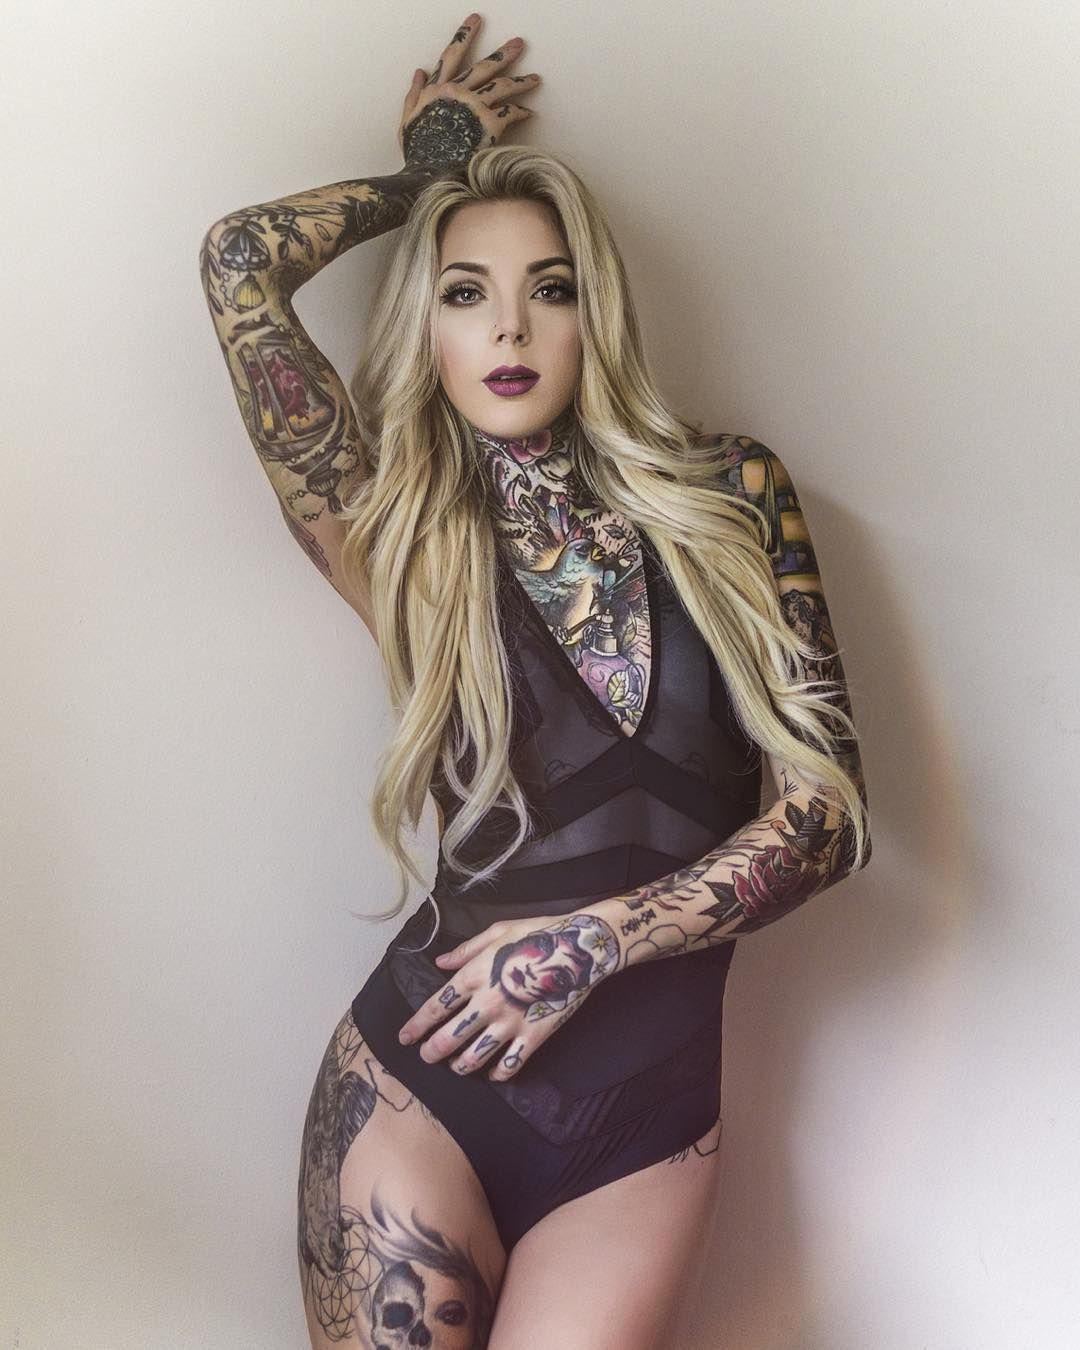 thanhdaica discover the mysterious world of madison skye glamorous d tattoo loved by millions video 64d379d46b6cb Discover The Mysterious World Of Madison Skye Glamorous 3d Tattoo Loved By Millions (Video)